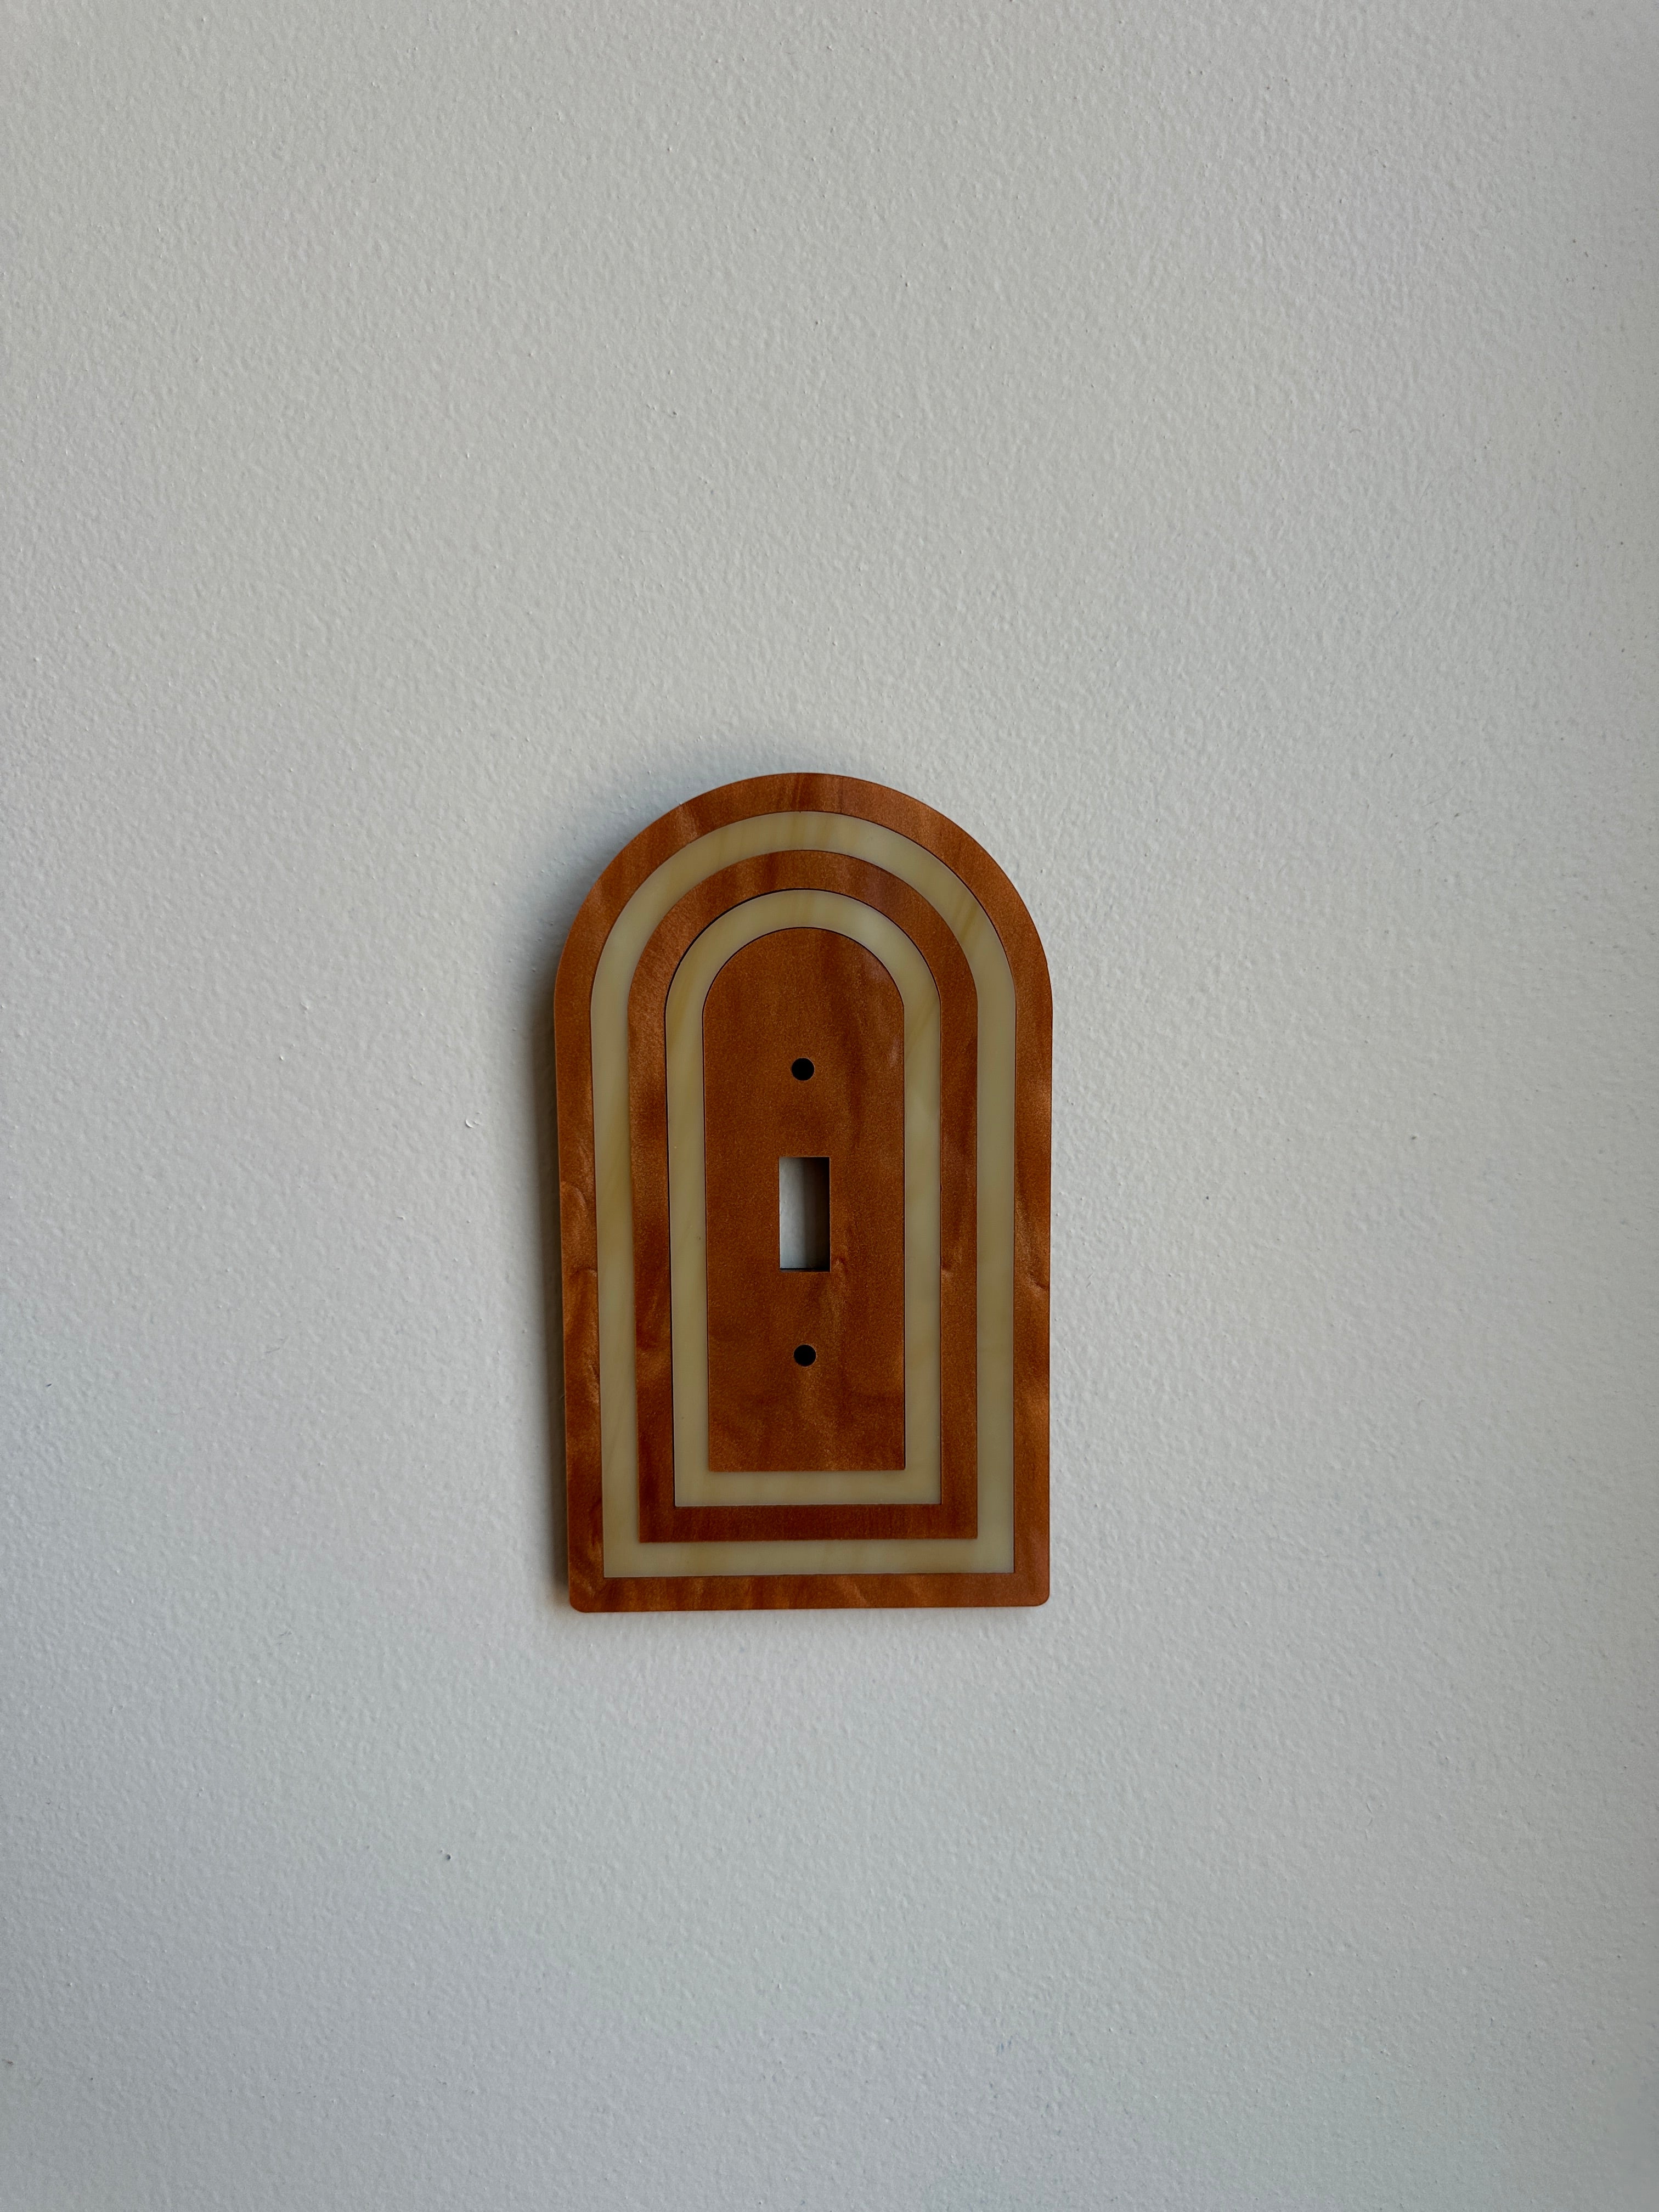 Acoustic Wave Layered Archway Light Switch Sample Sale